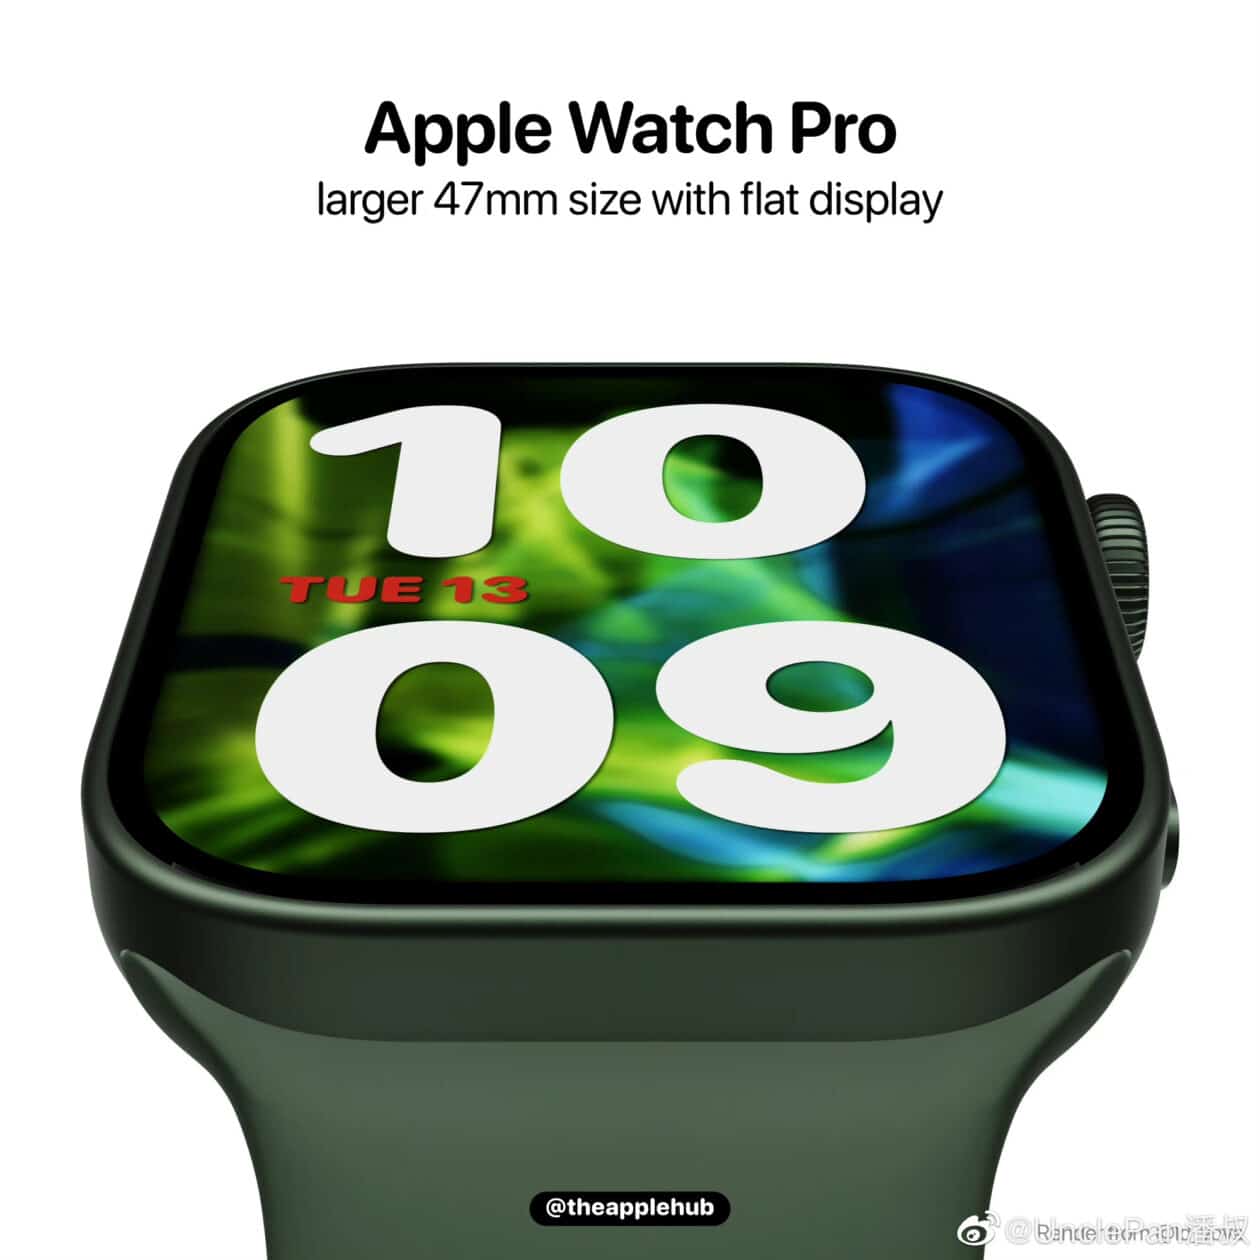 Conceito do Apple Watch Pro